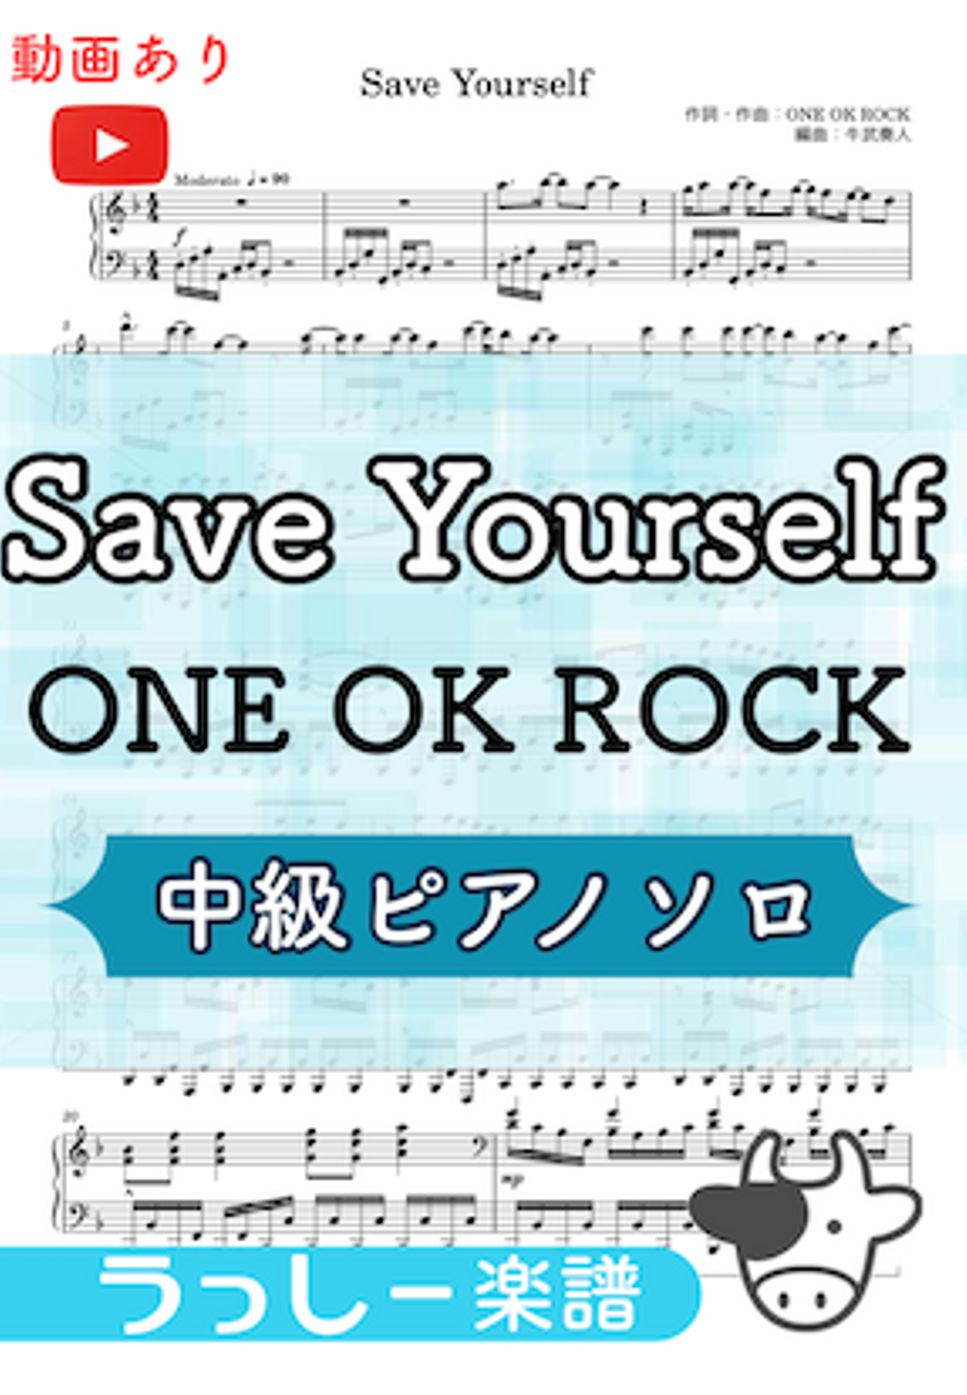 ONE OK ROCK - Save Yourself (中級ピアノ) by 牛武奏人